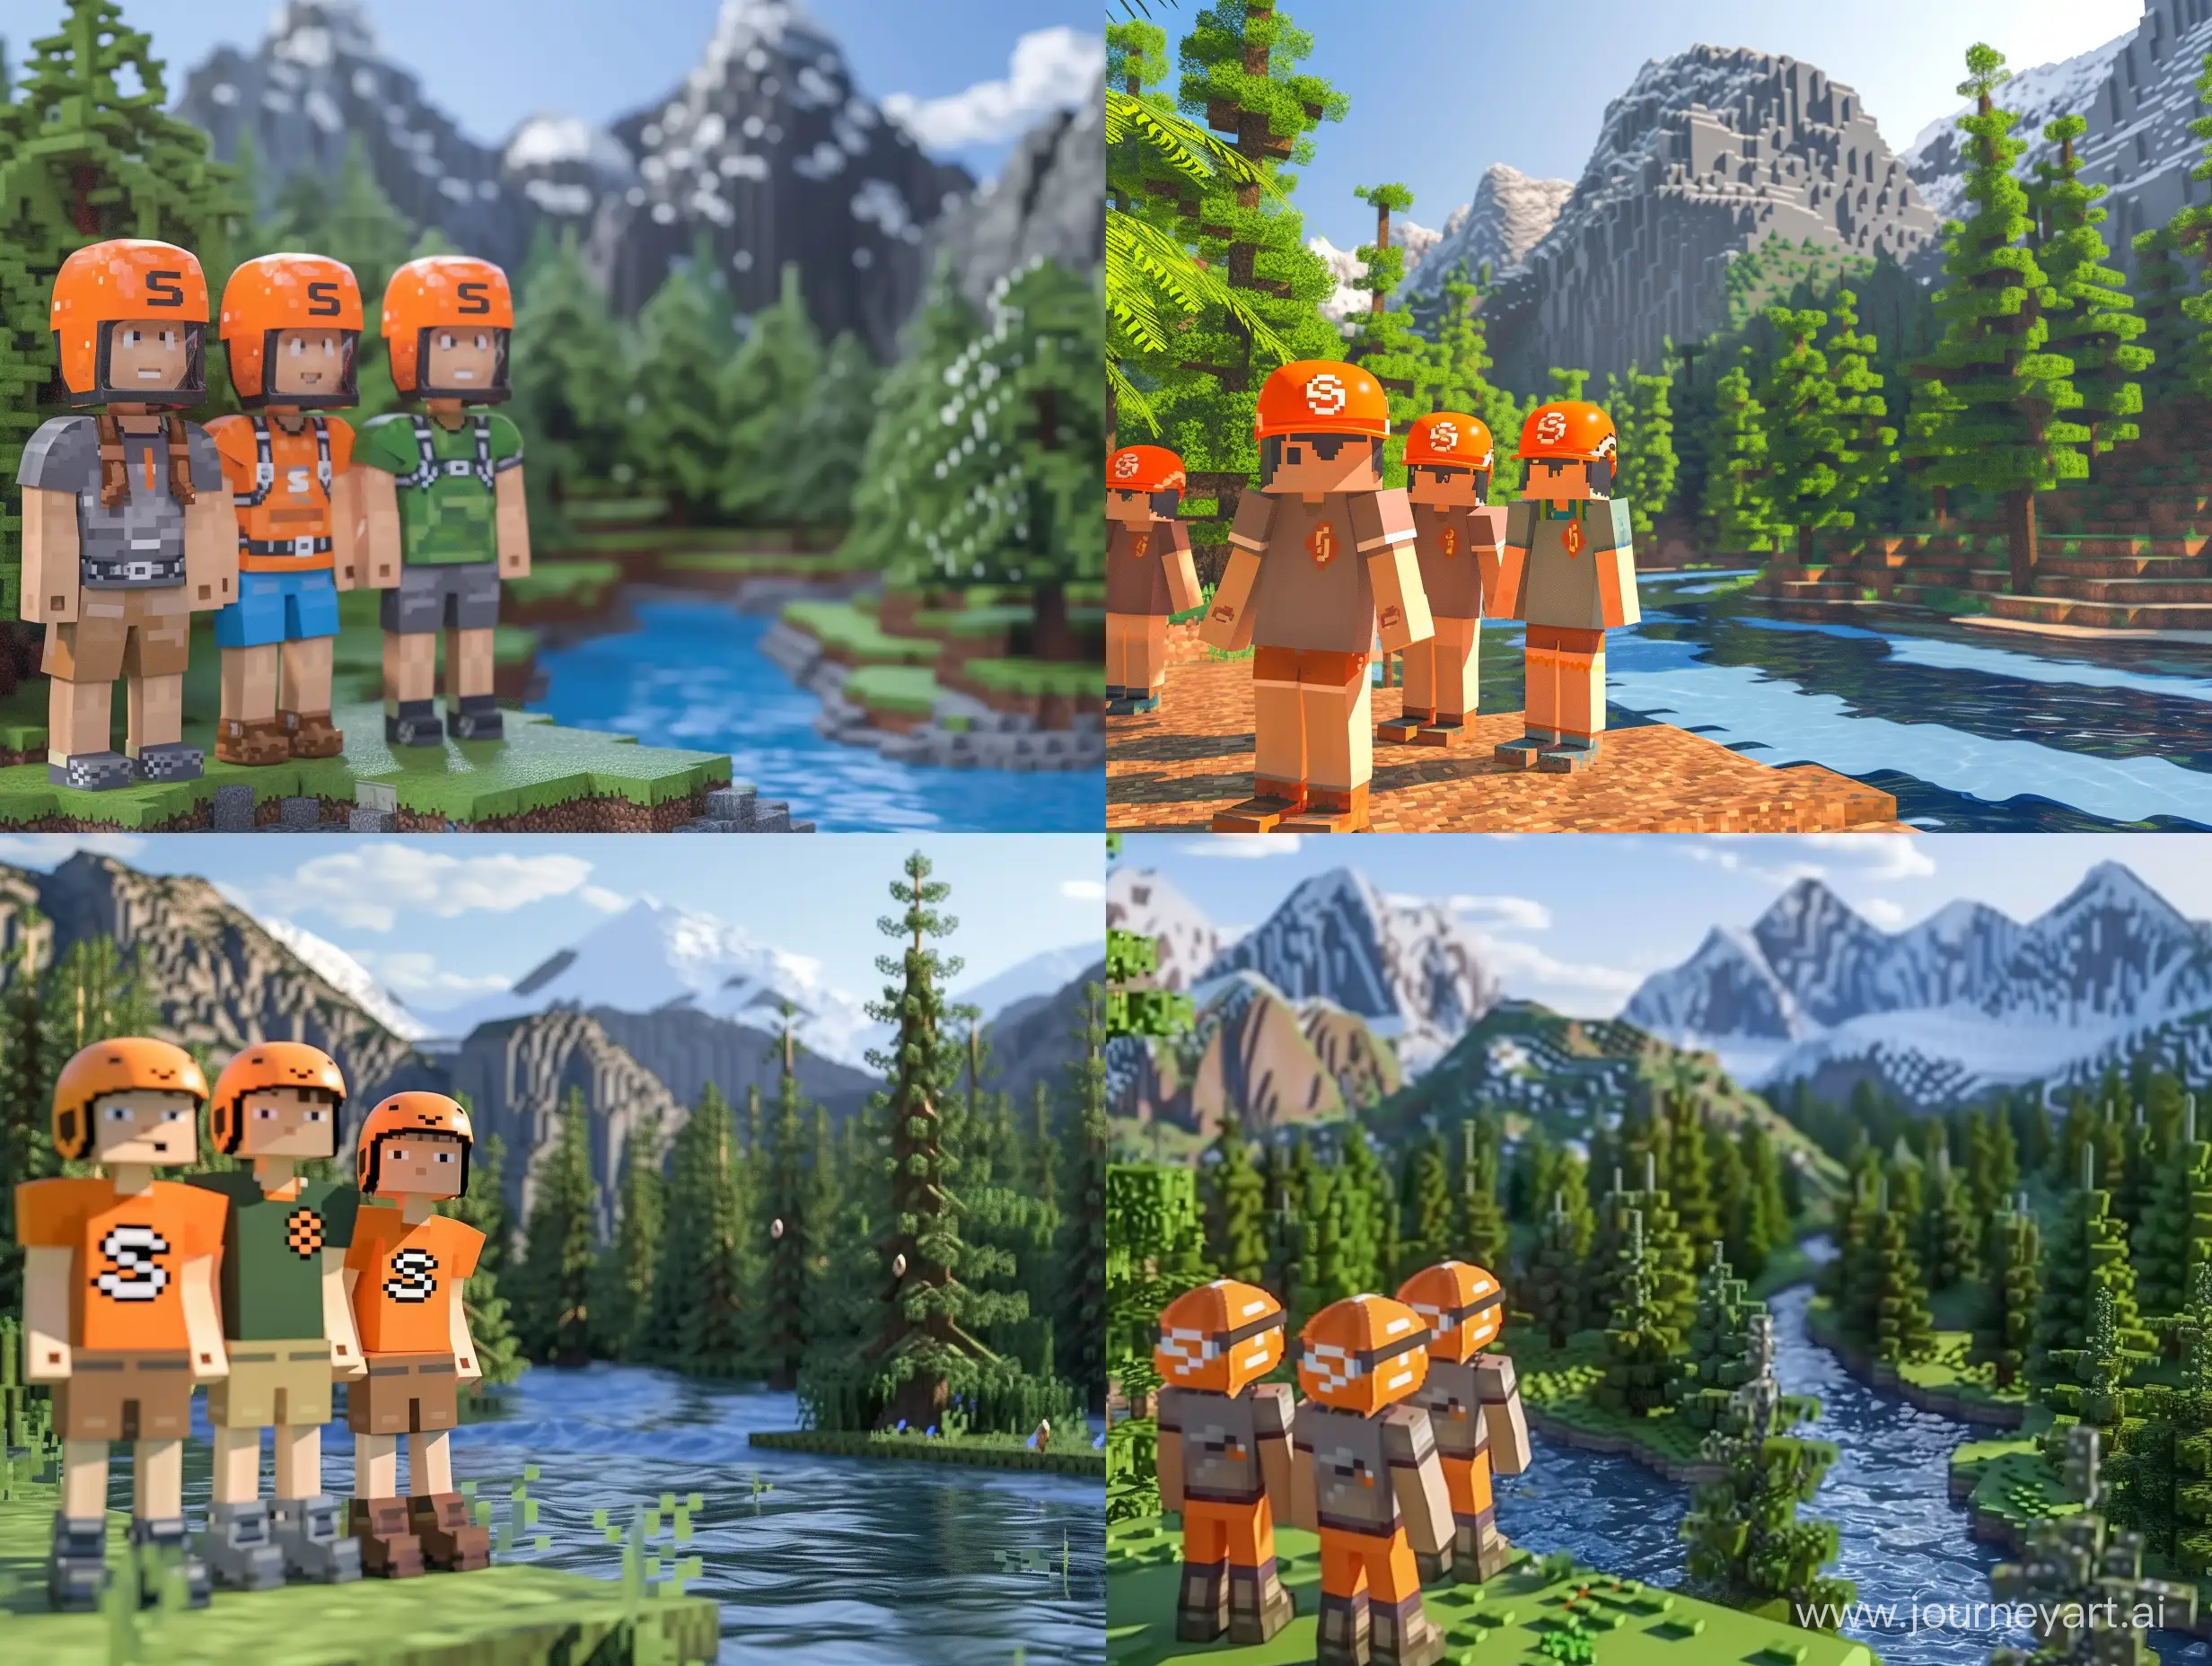 Group-of-Friends-Exploring-Minecraft-World-with-Nature-Scenery